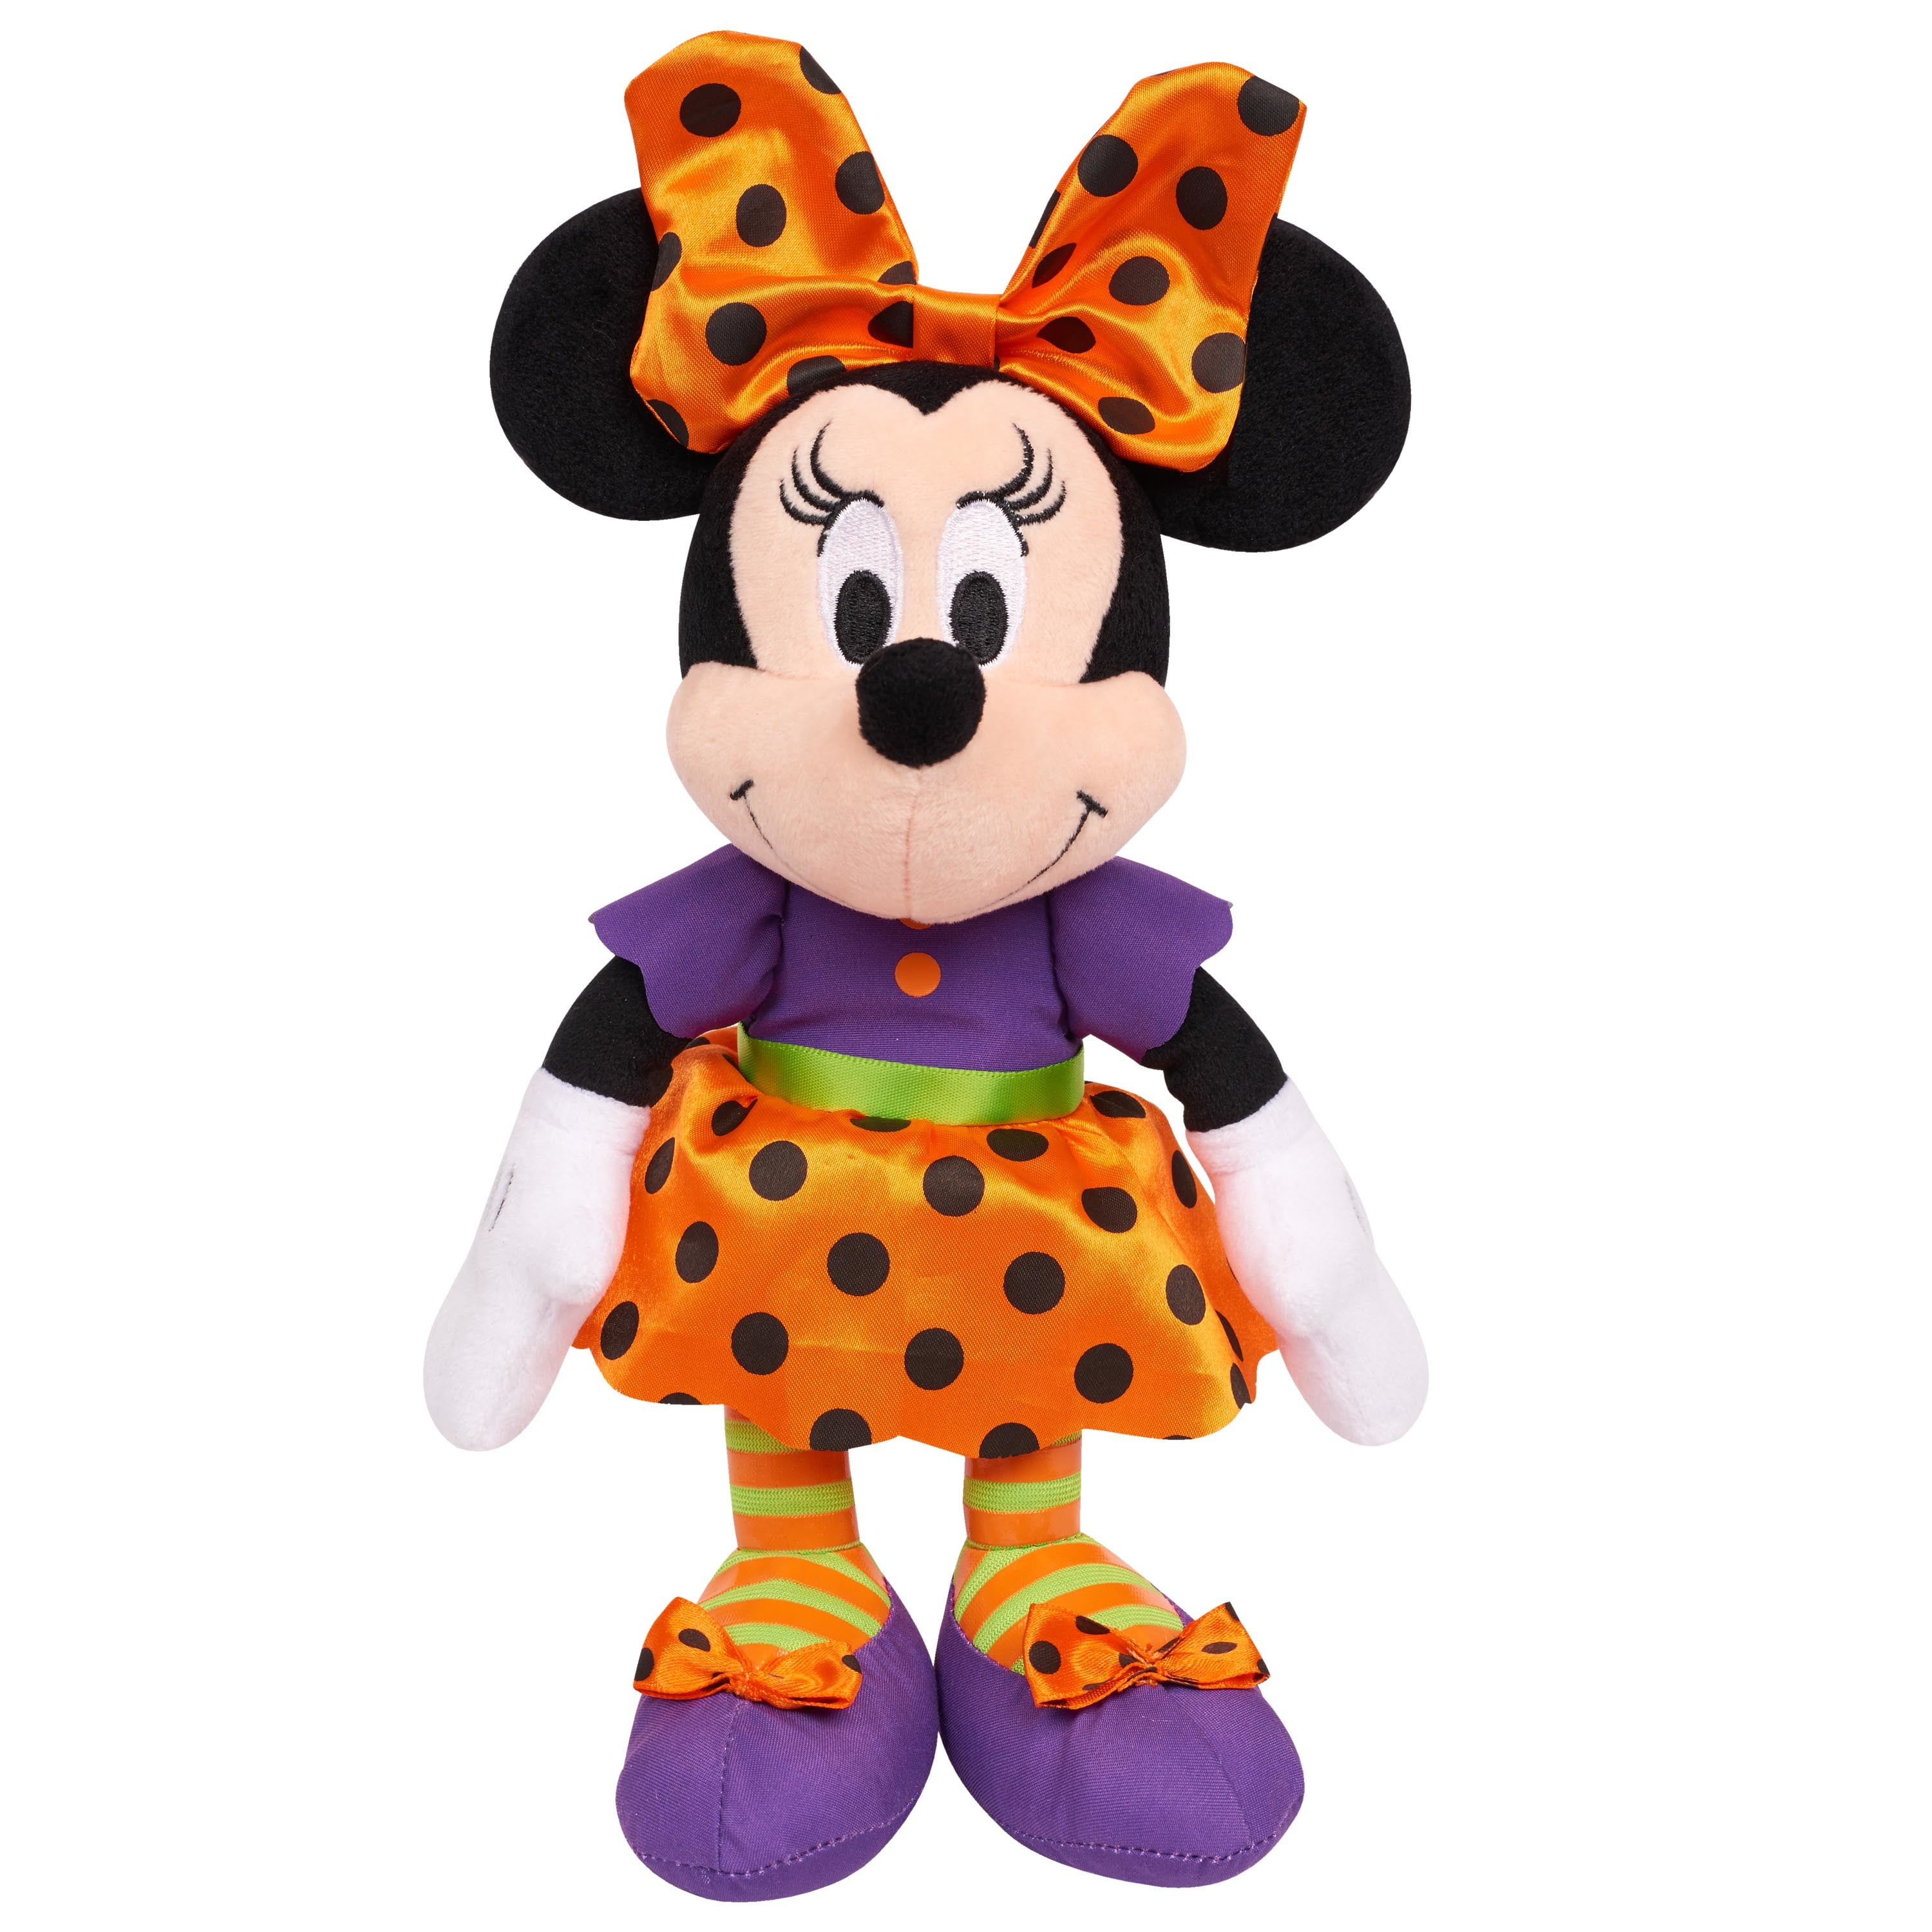 Disney Halloween Minnie Mouse Stuffed Animal, Bean Plush Toy for Kids,  Officially Licensed Kids Toys for Ages 2 Up, Gifts and Presents -  